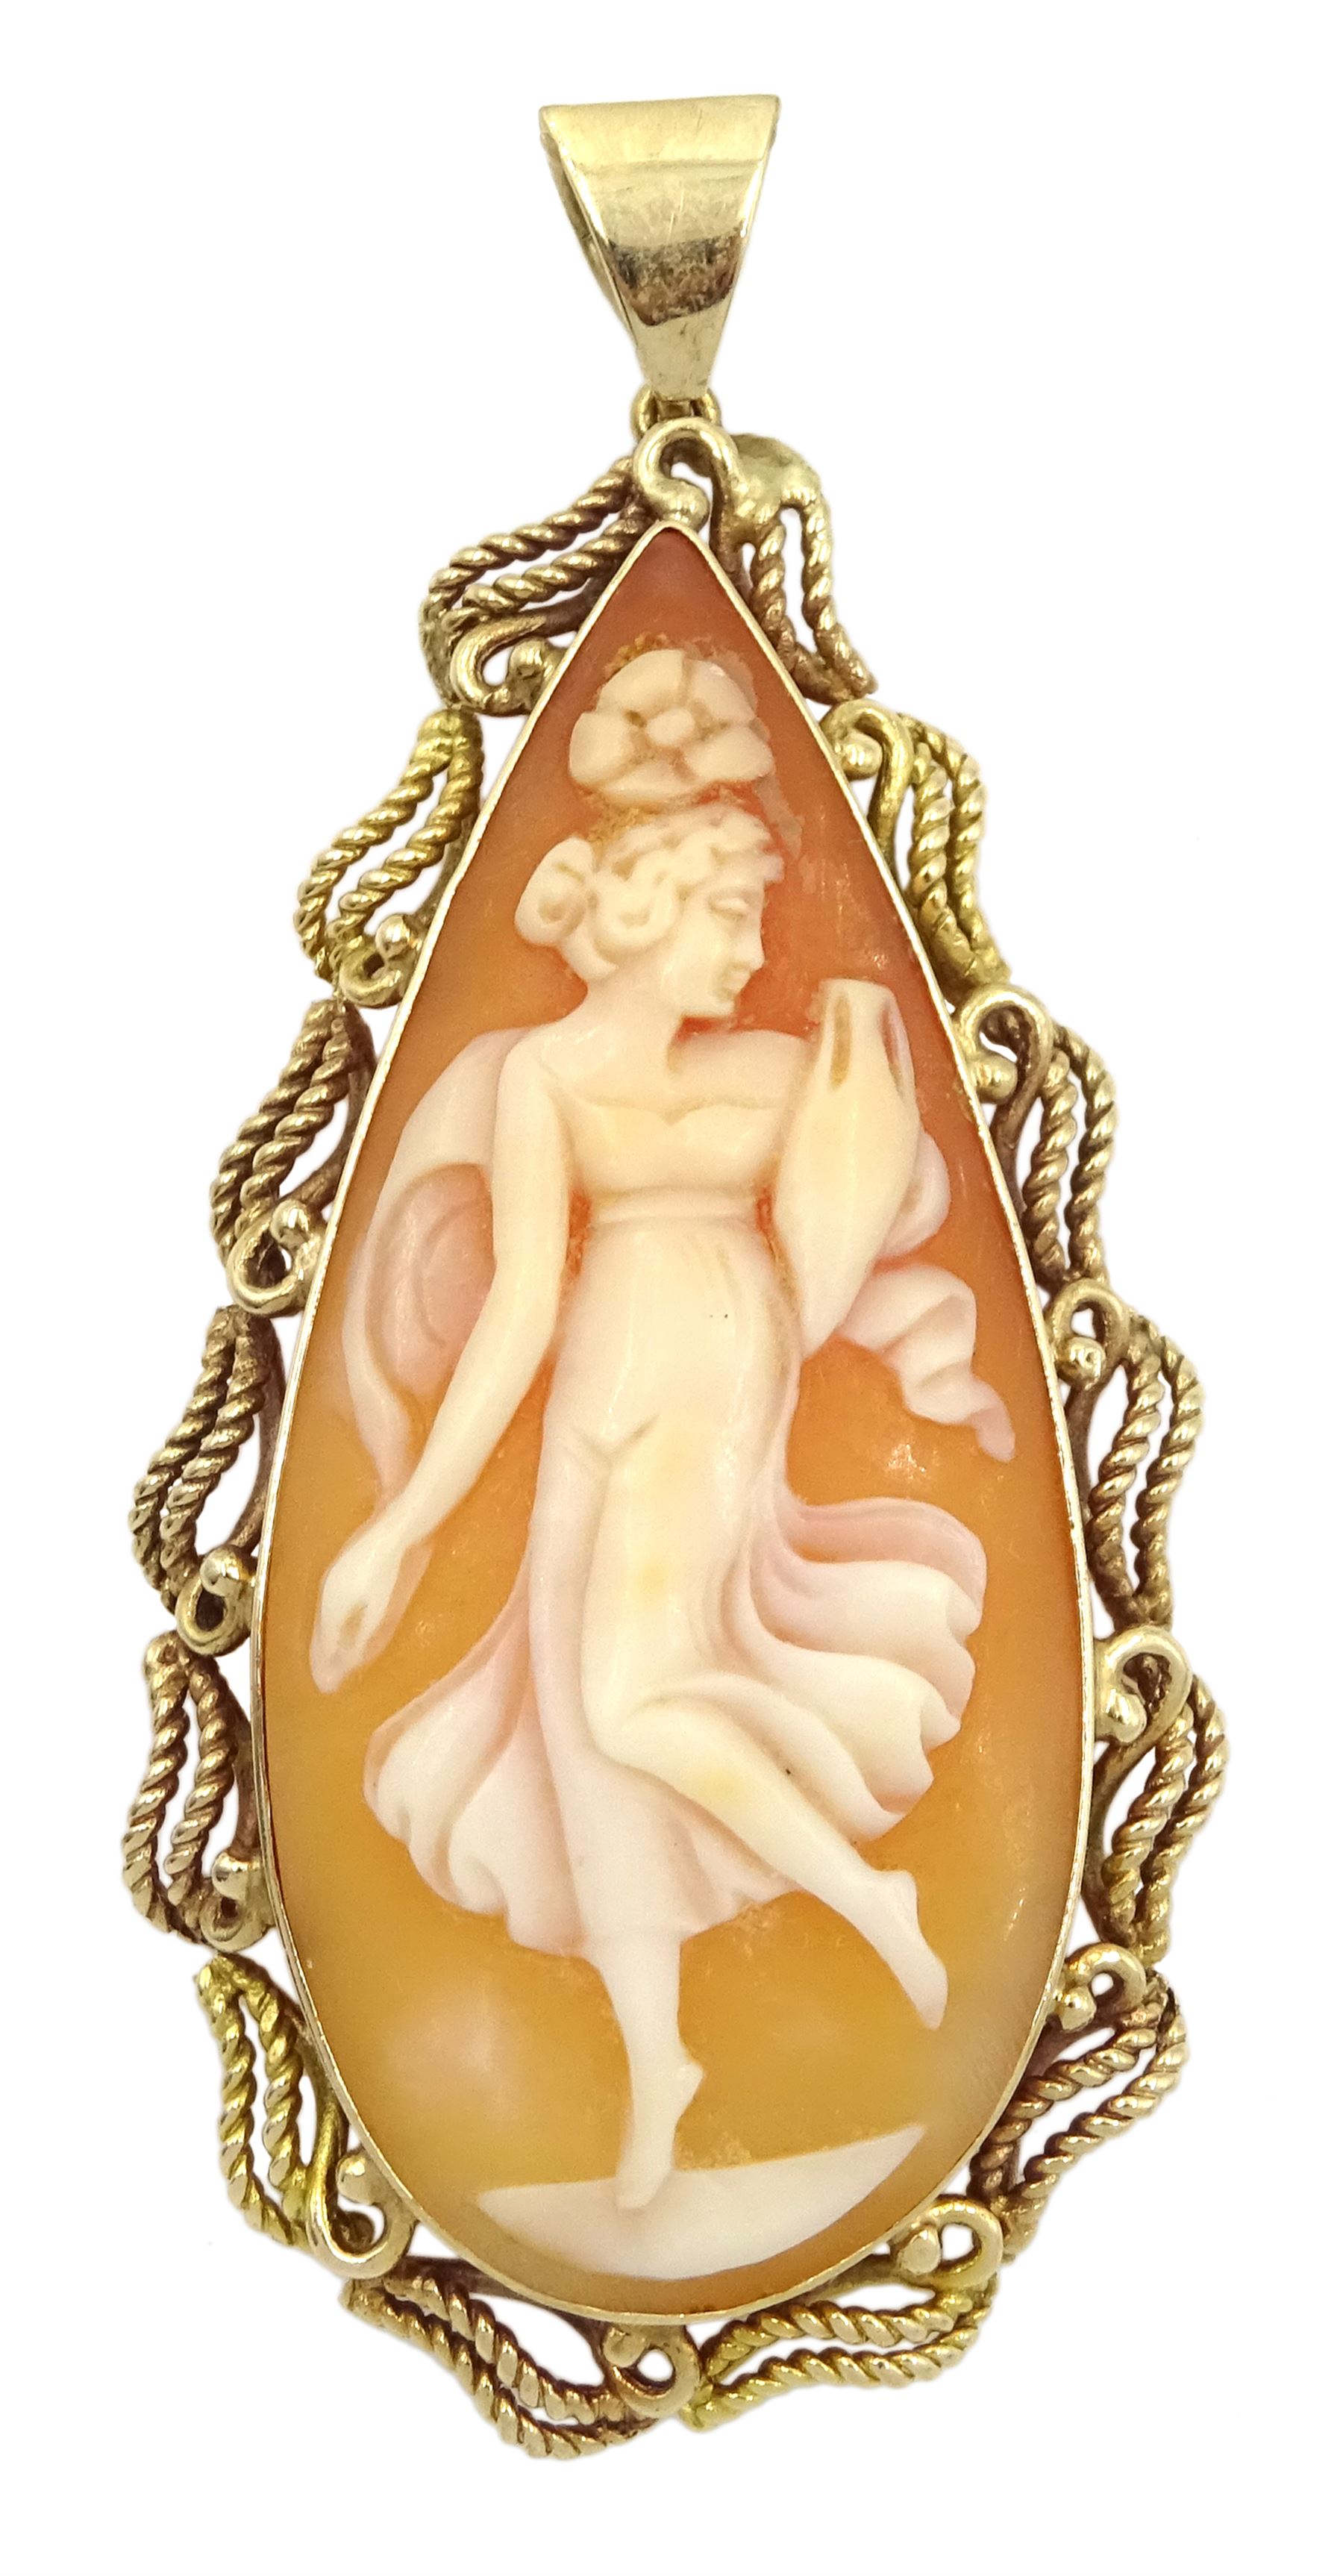 9ct gold pear shaped cameo depicting a dancing lady